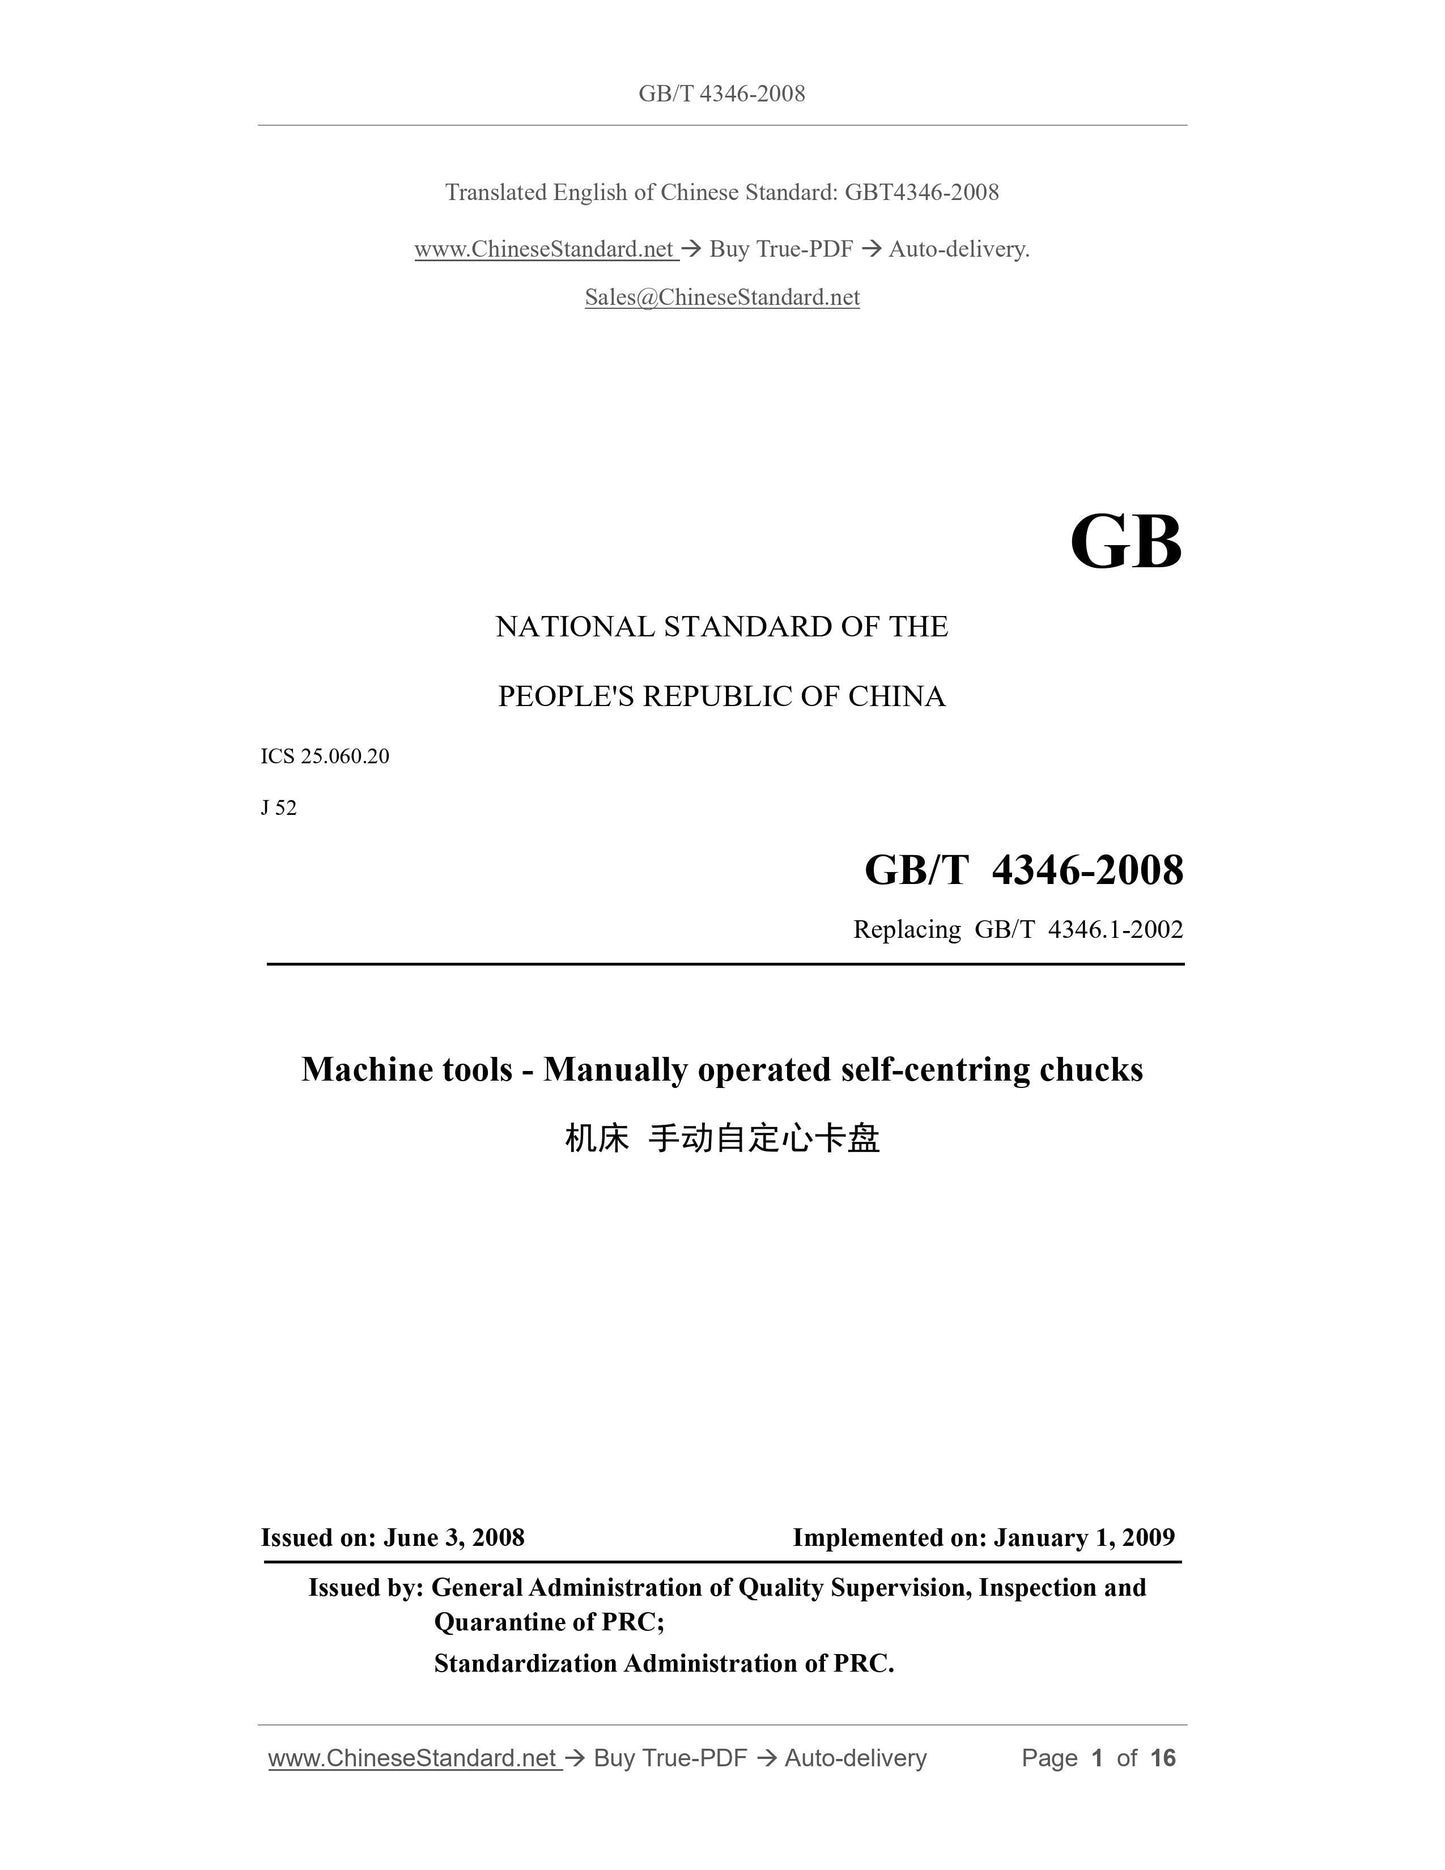 GB/T 4346-2008 Page 1